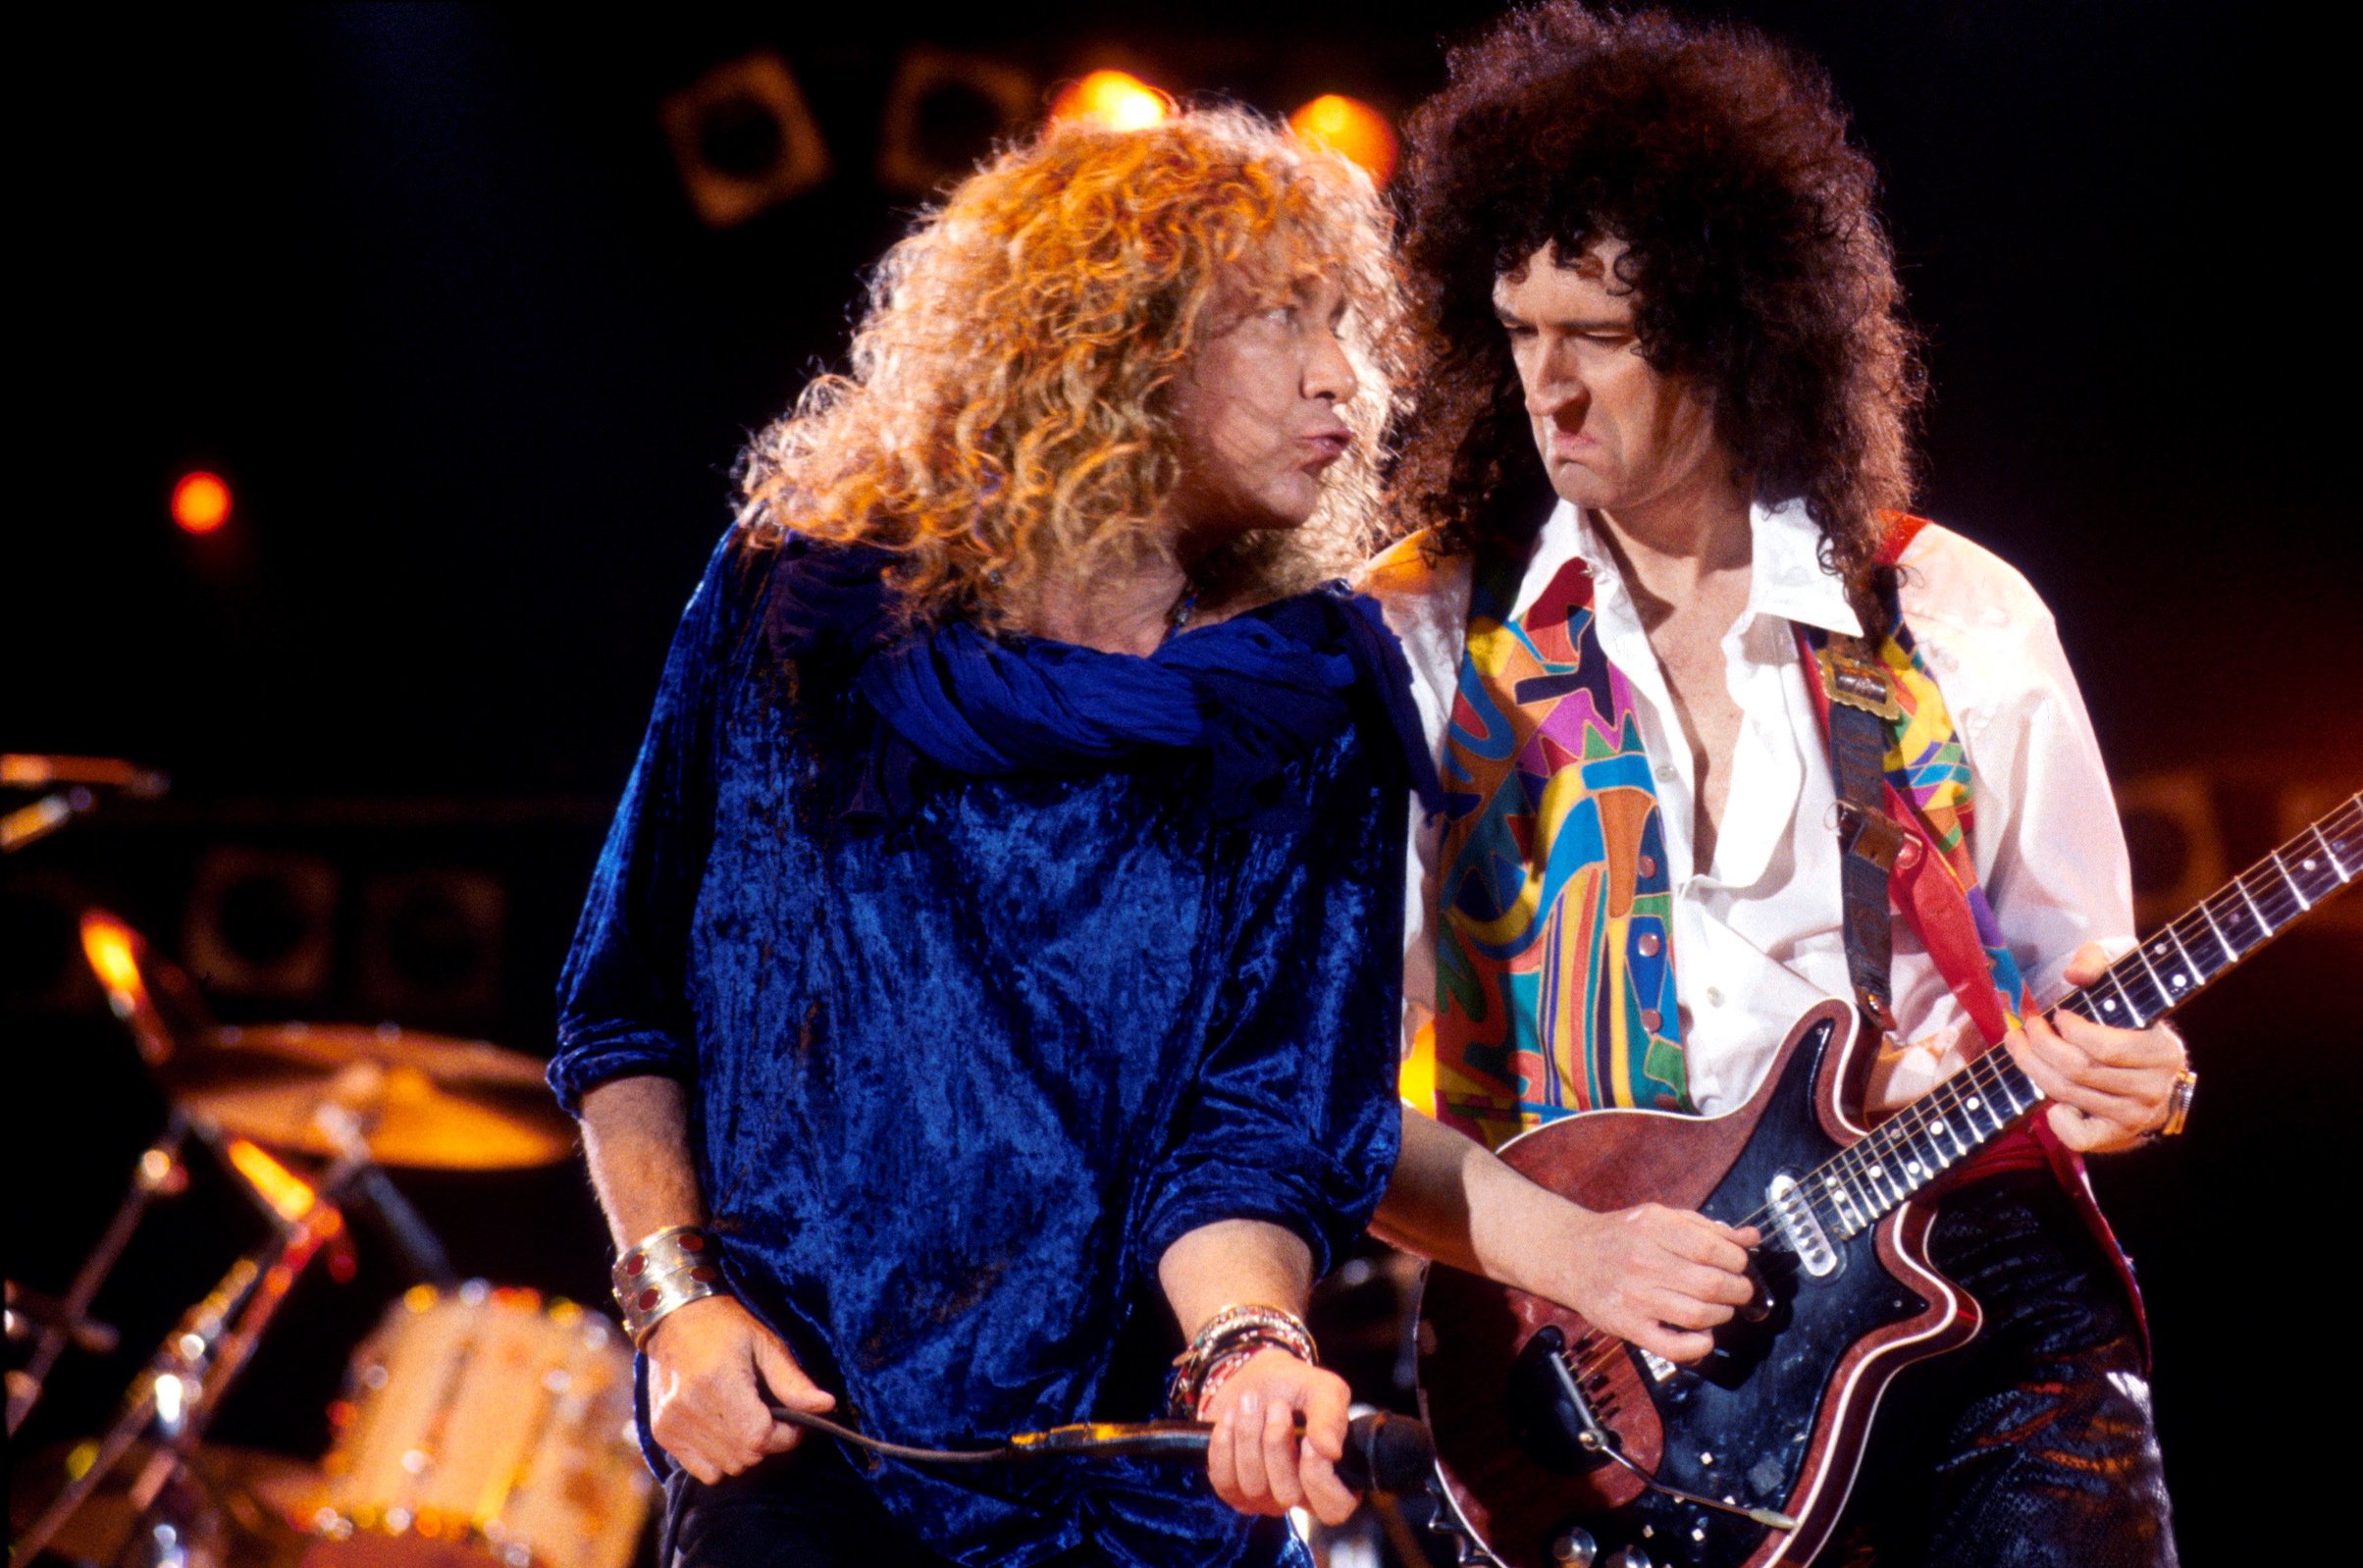 Robert Plant of Led Zeppelin performs on stage with Brian May of Queen at the Freddie Mercury Tribute Concert in 1992